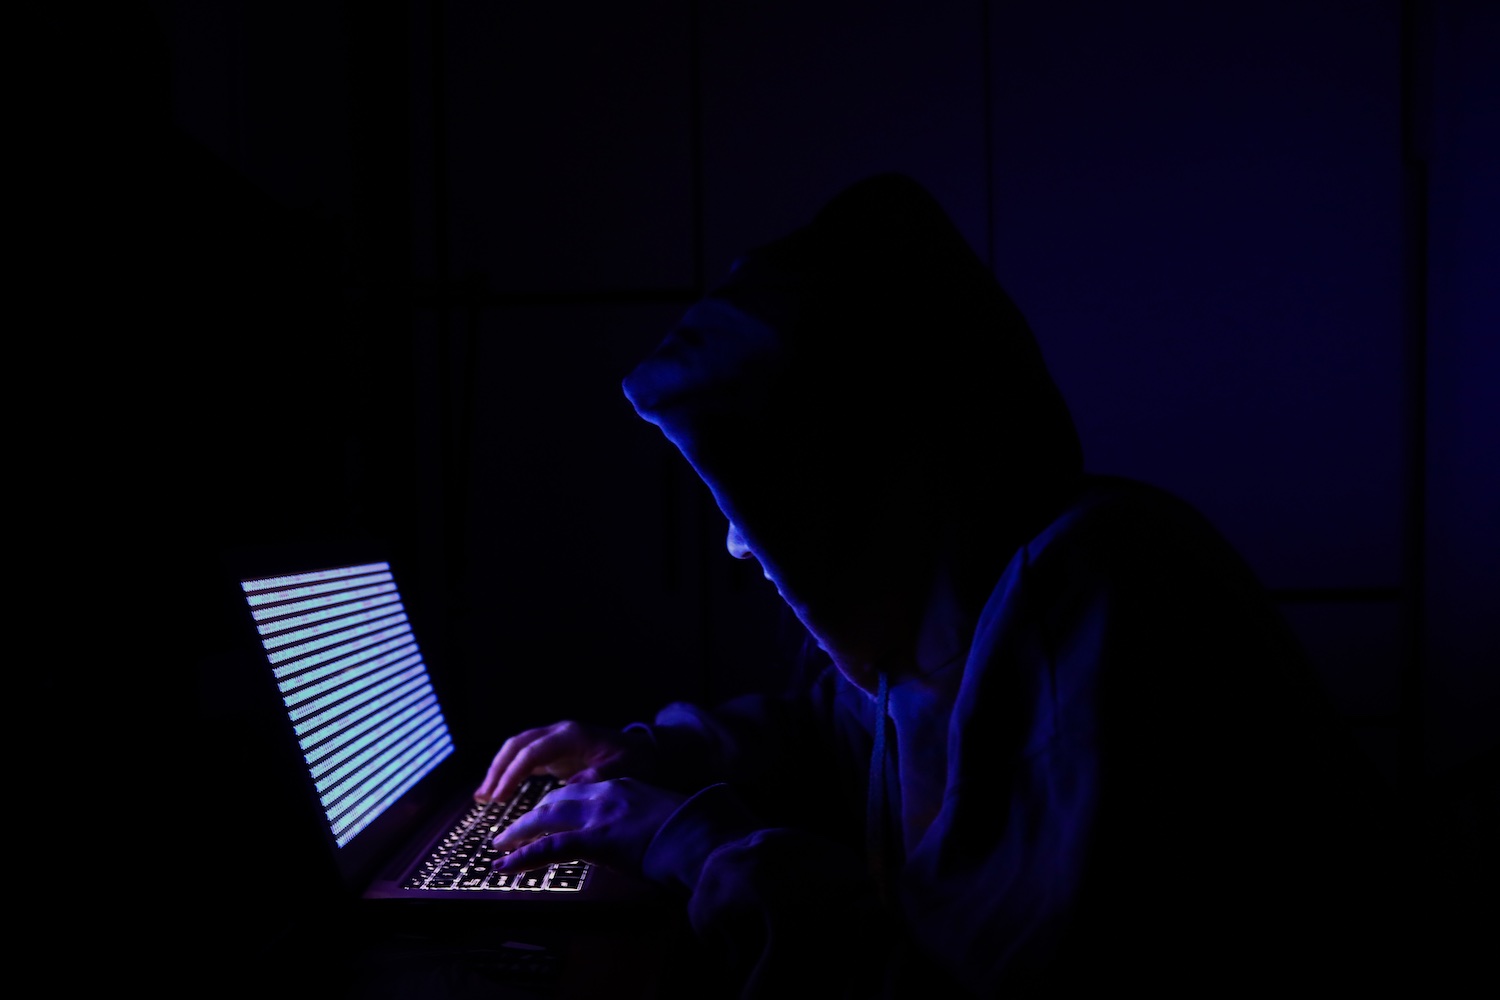 A hacker in a hoodie sweatshirt hunched over a laptop.